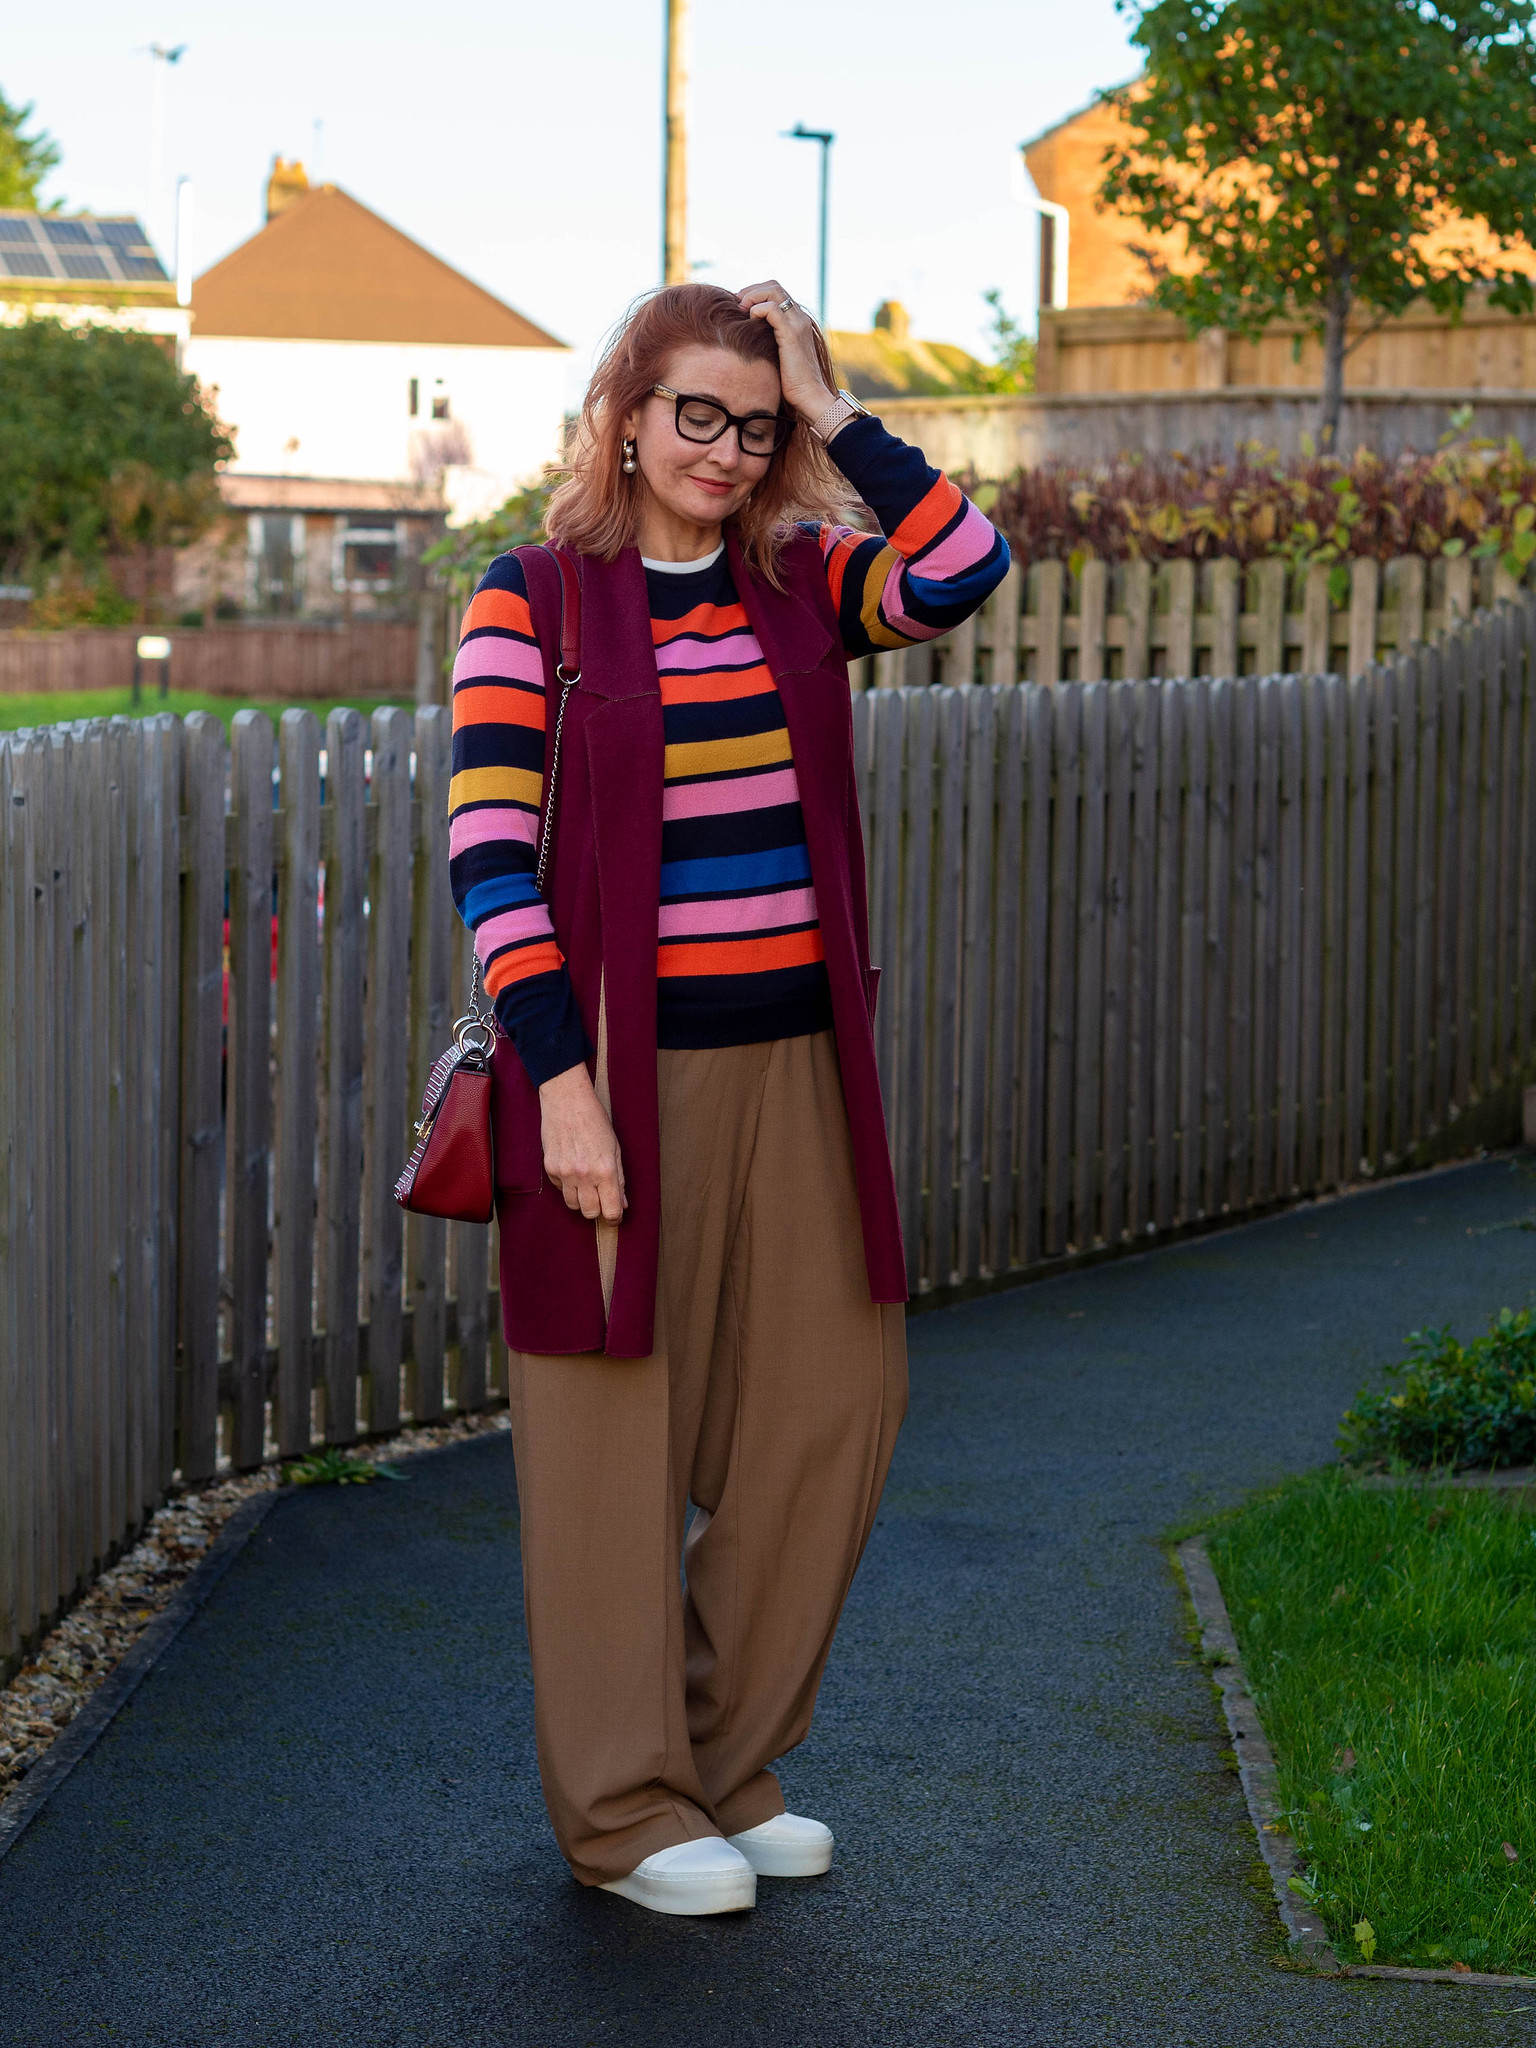 Layering in Autumn/Winter: How to Layer For Style AND Warmth Layering | Not Dressed As Lamb aka Catherine Summers, over 50 fashion & style blogger